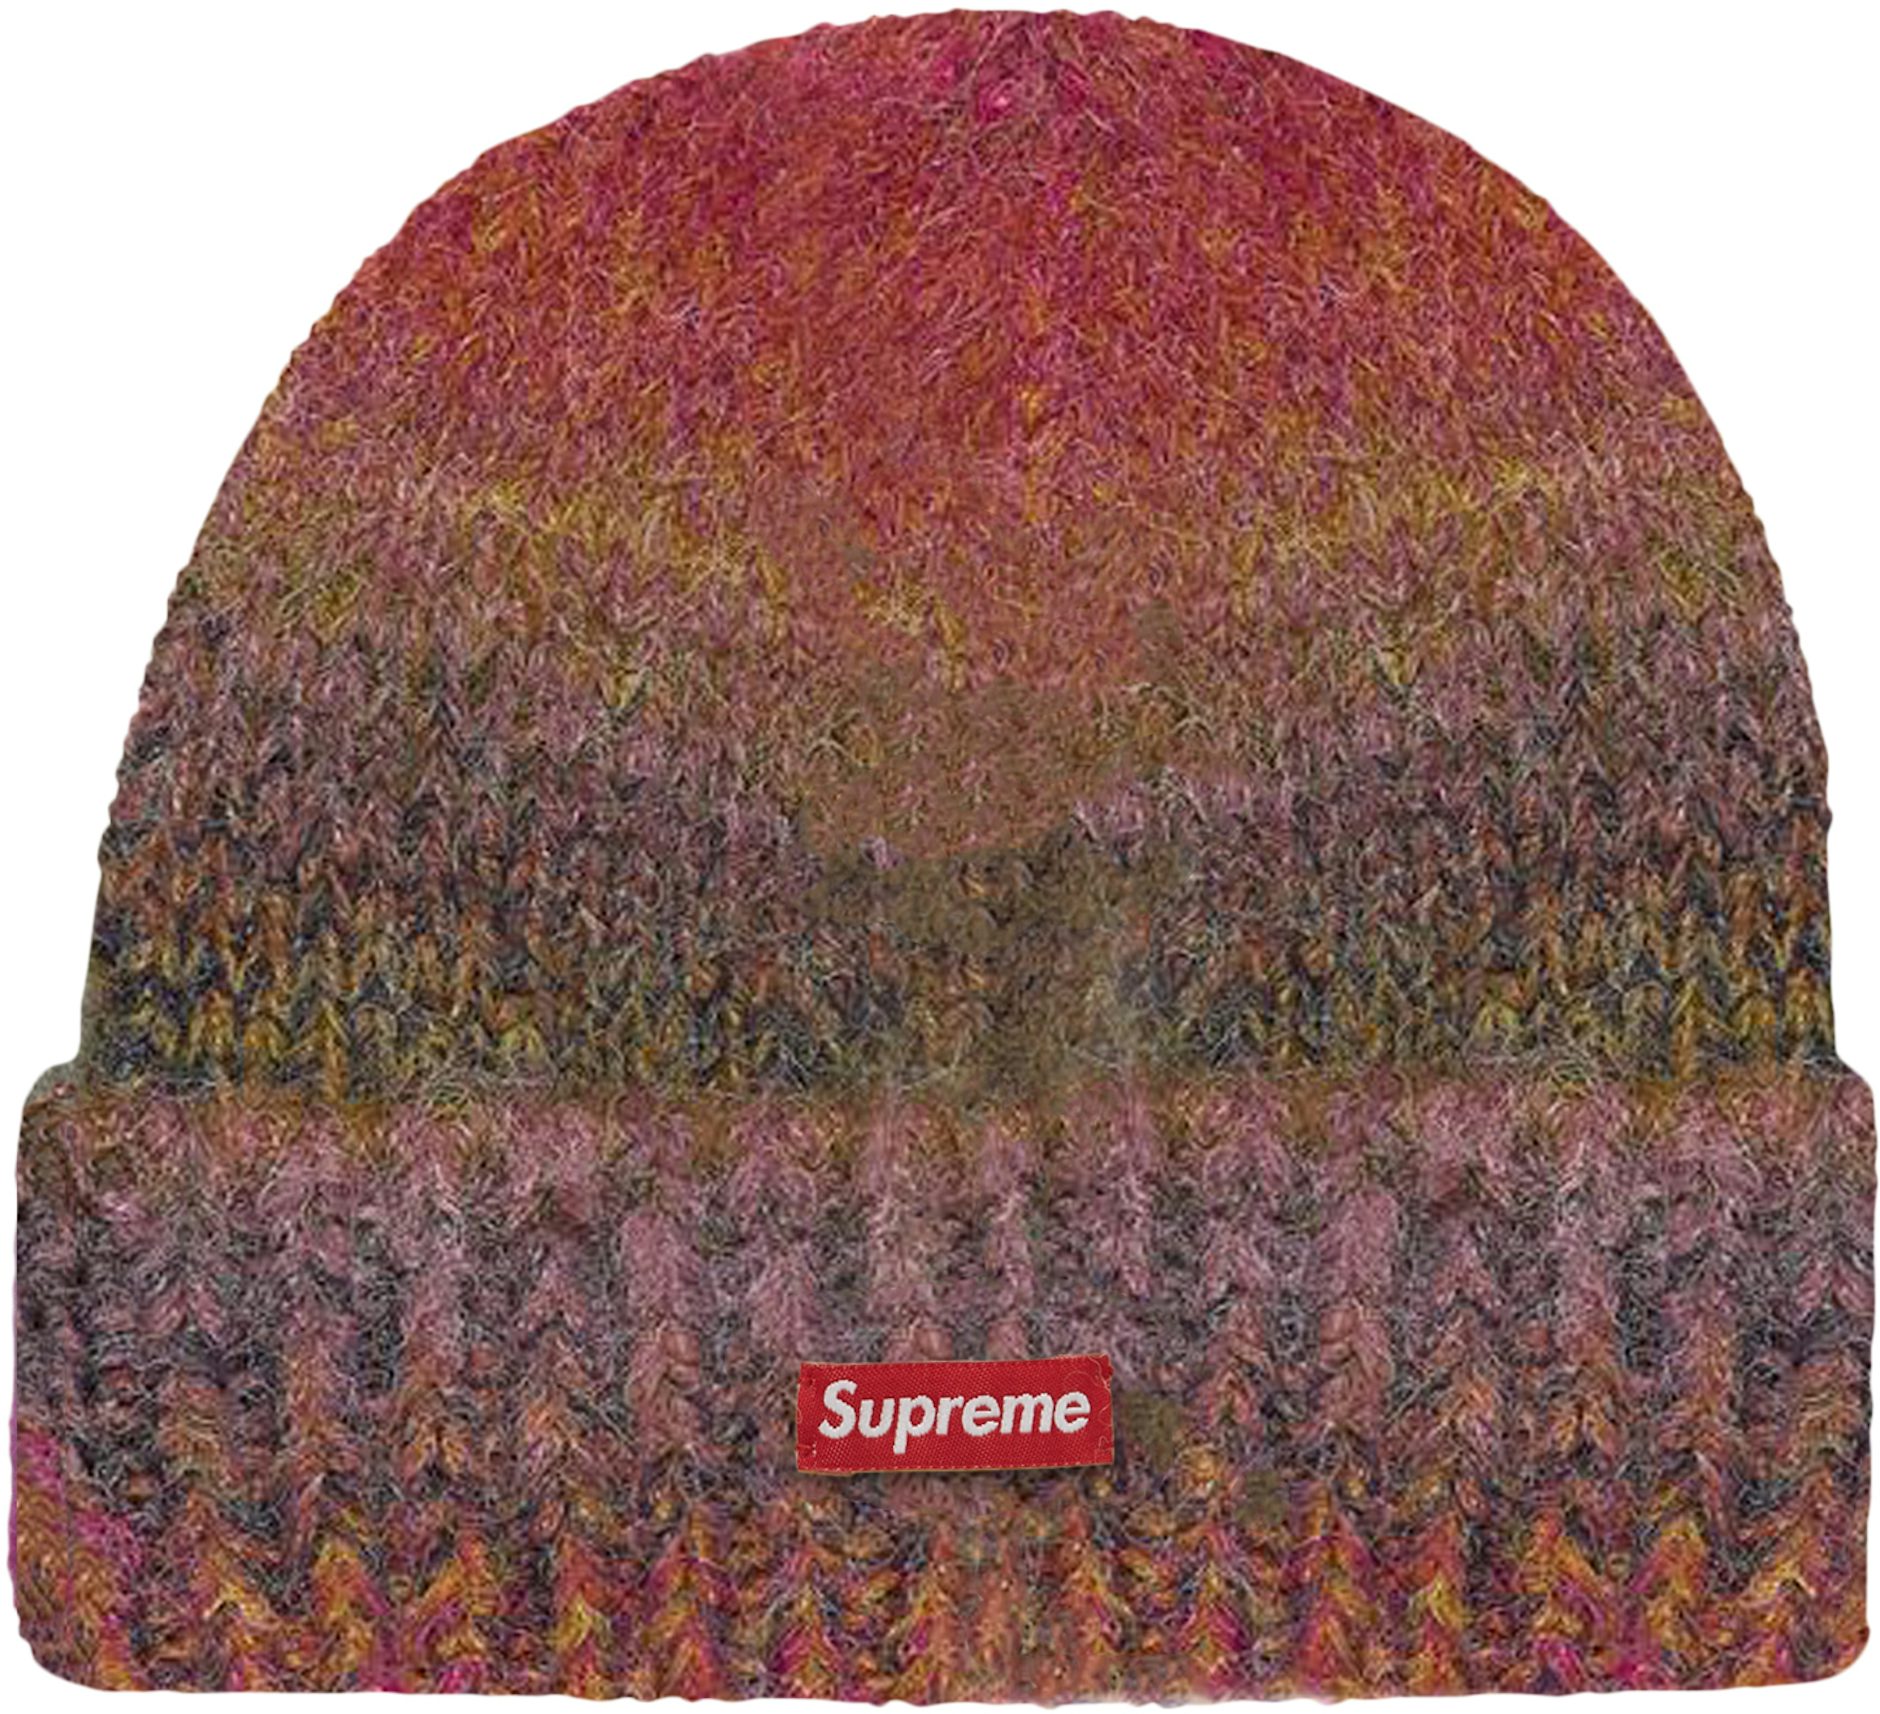 Beanie Supreme Red size L International in Polyester - 8901580